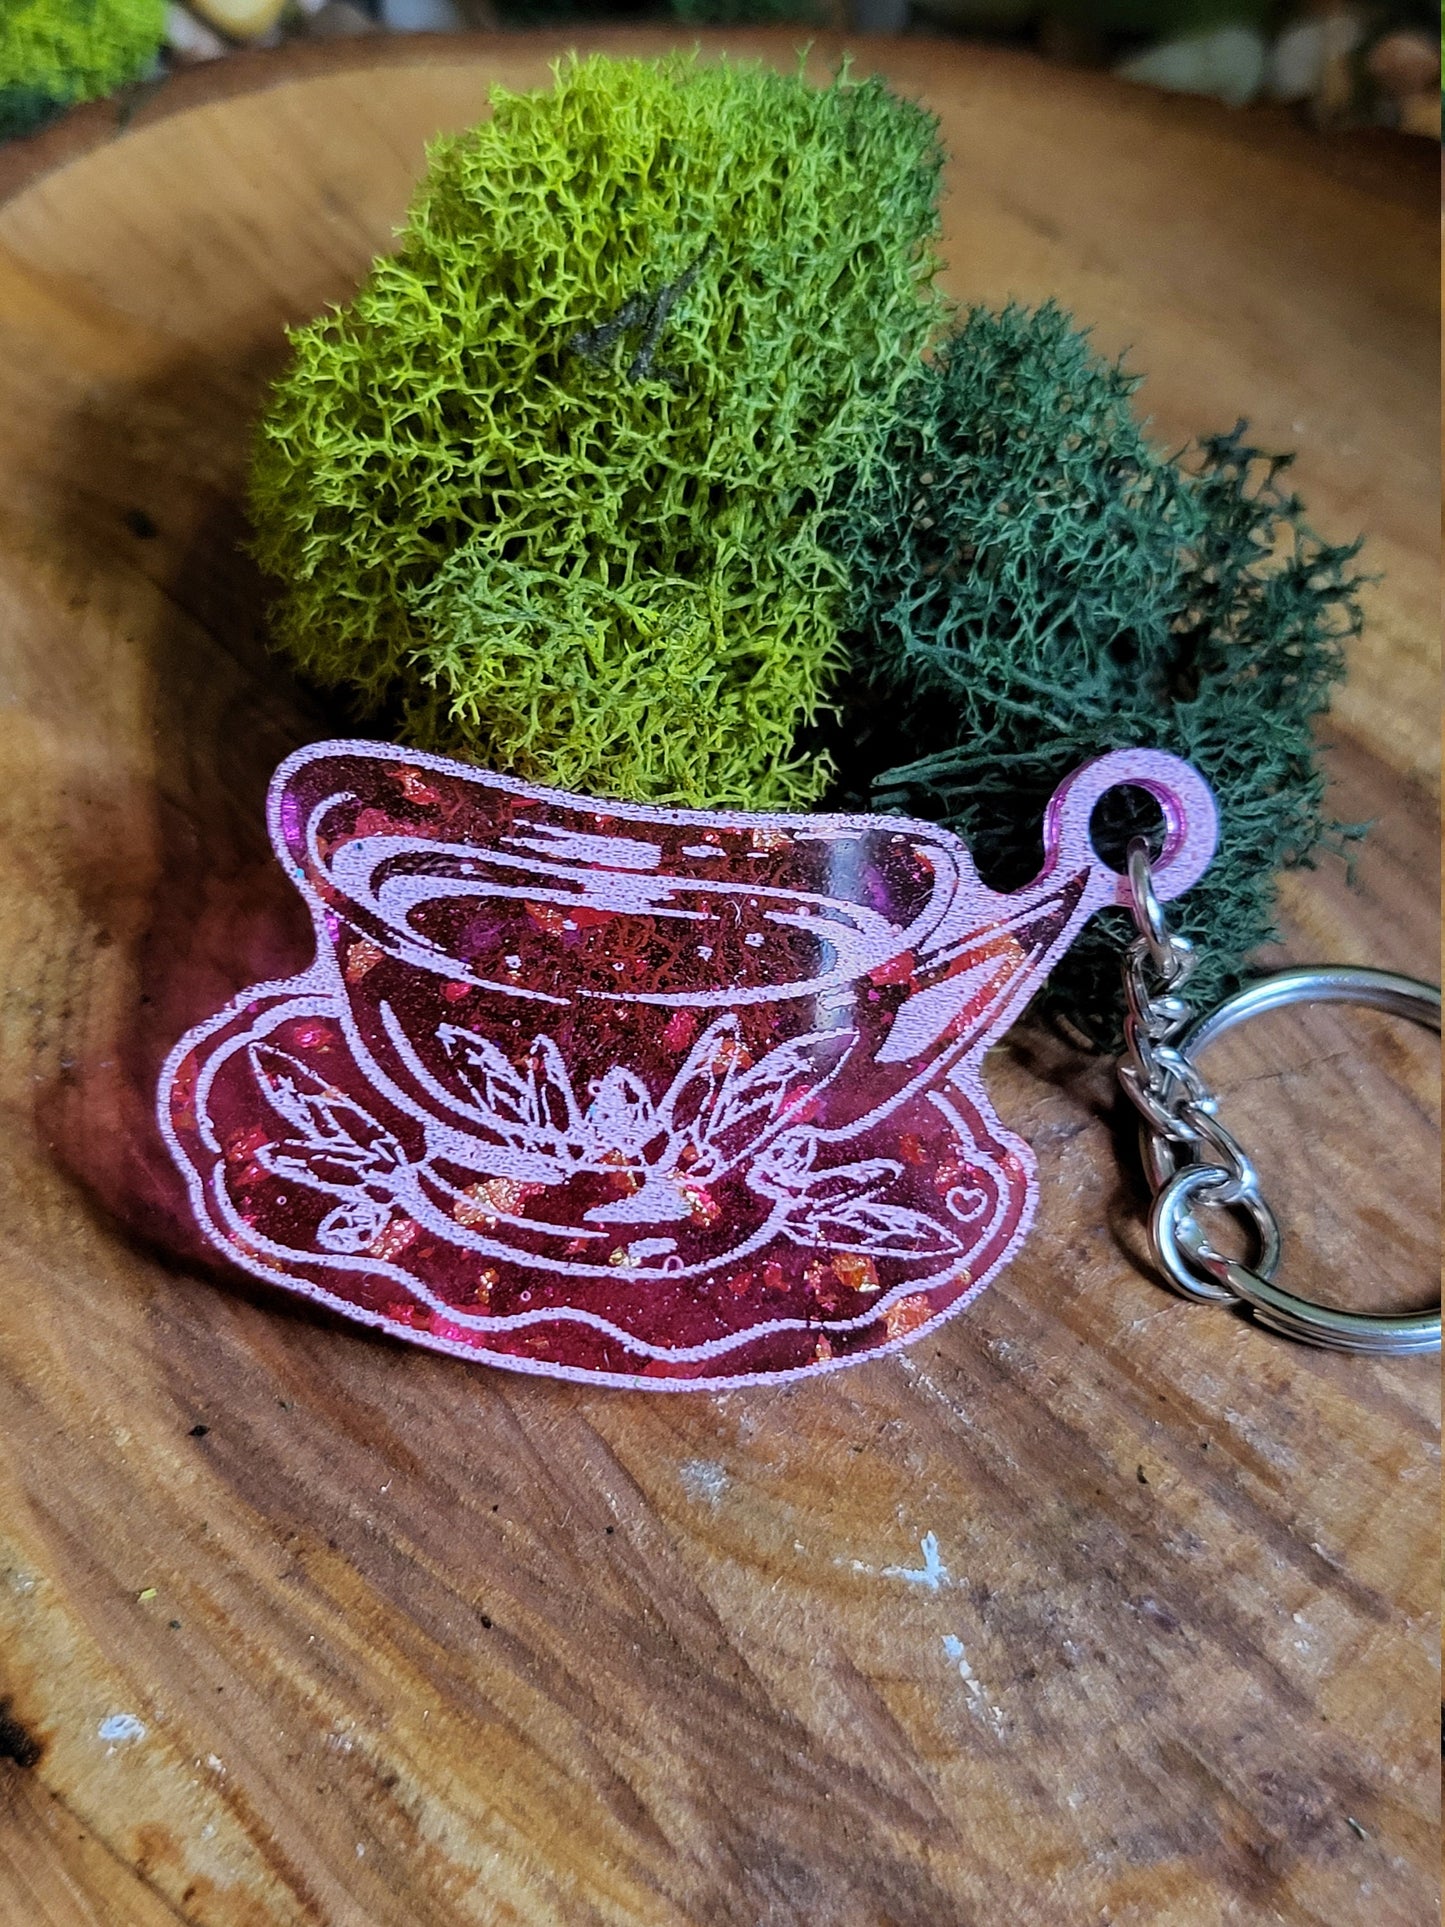 Pink and Faux Gold Flake Teacup Keychain